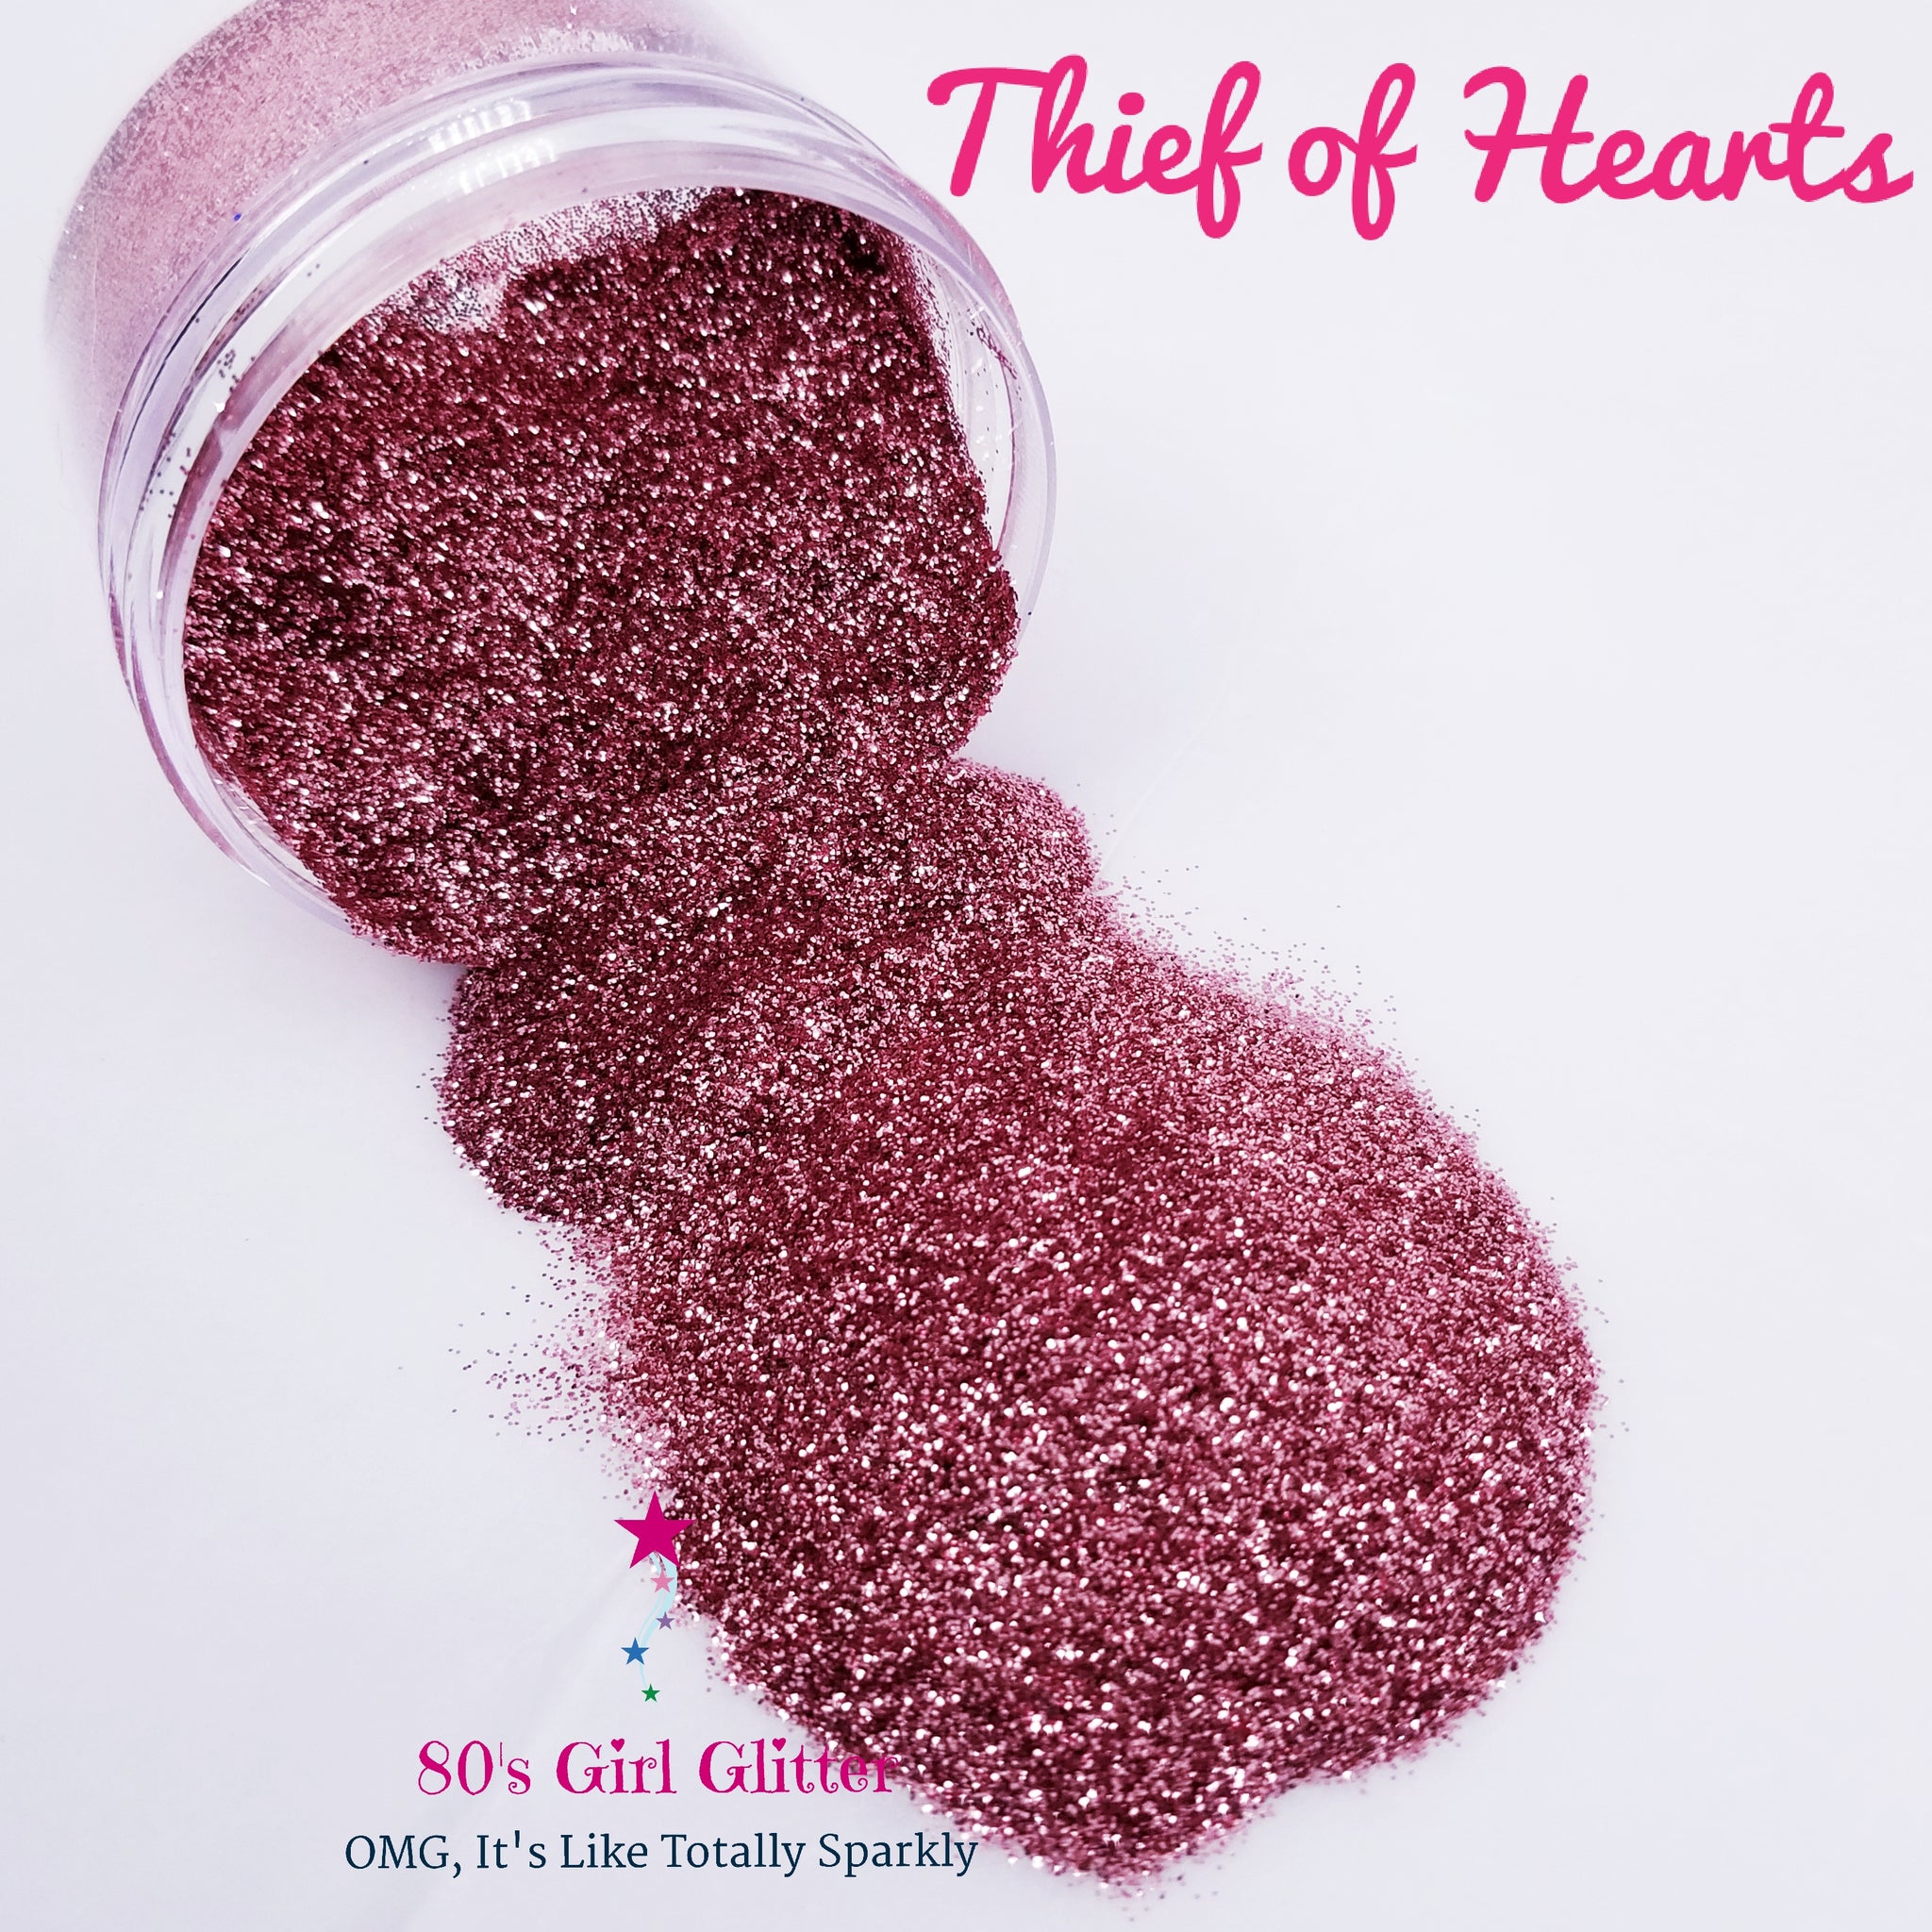 Thief of Hearts - Glitter - Pink Glitter - Dusty Pink and Silver